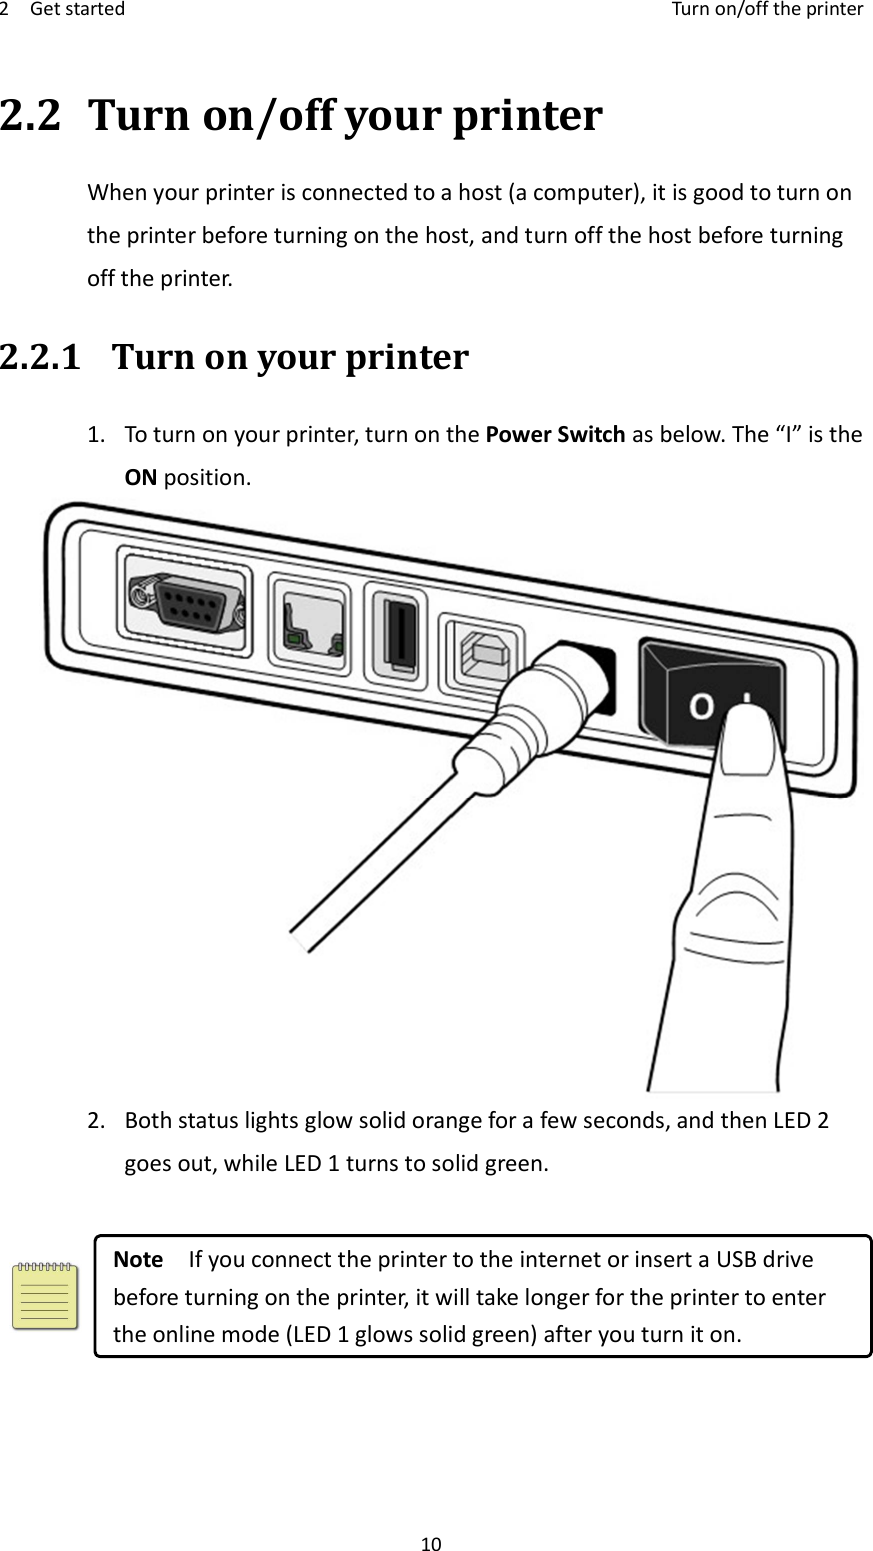 2    Get started    Turn on/off the printer 10 2.2 Turn on/off your printer When your printer is connected to a host (a computer), it is good to turn on the printer before turning on the host, and turn off the host before turning off the printer. 2.2.1 Turn on your printer 1.  To turn on your printer, turn on the Power Switch as below. The “I” is the ON position.  2.  Both status lights glow solid orange for a few seconds, and then LED 2 goes out, while LED 1 turns to solid green.   Note    If you connect the printer to the internet or insert a USB drive before turning on the printer, it will take longer for the printer to enter the online mode (LED 1 glows solid green) after you turn it on.   